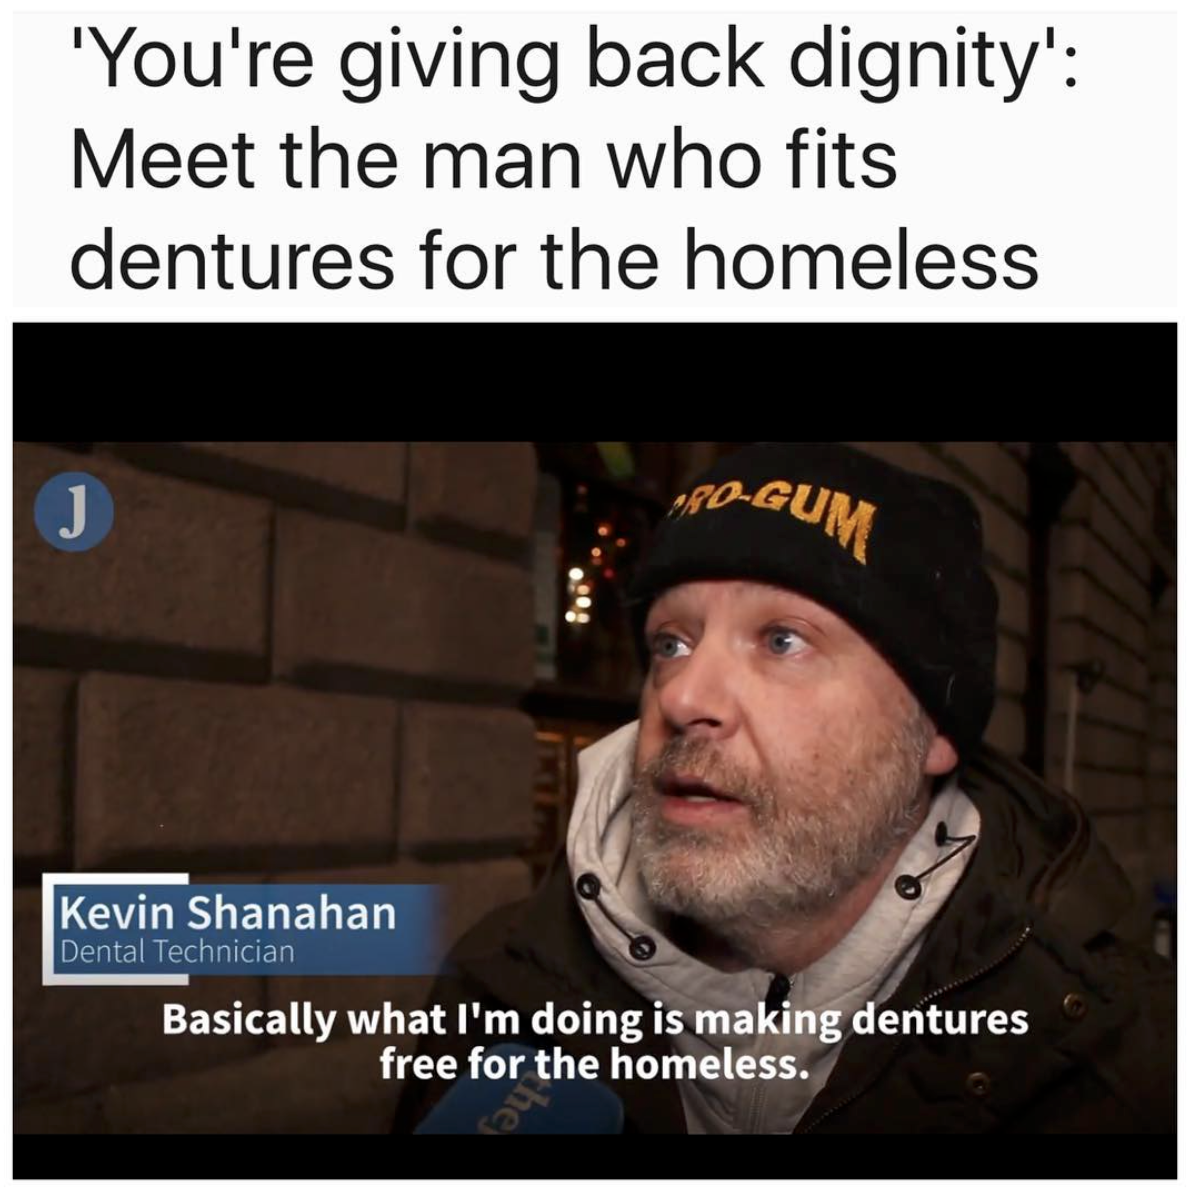 wholesome homeless meme - 'You're giving back dignity' Meet the man who fits dentures for the homeless FoGum Kevin Shanahan Dental Technician Basically what I'm doing is making dentures free for the homeless.